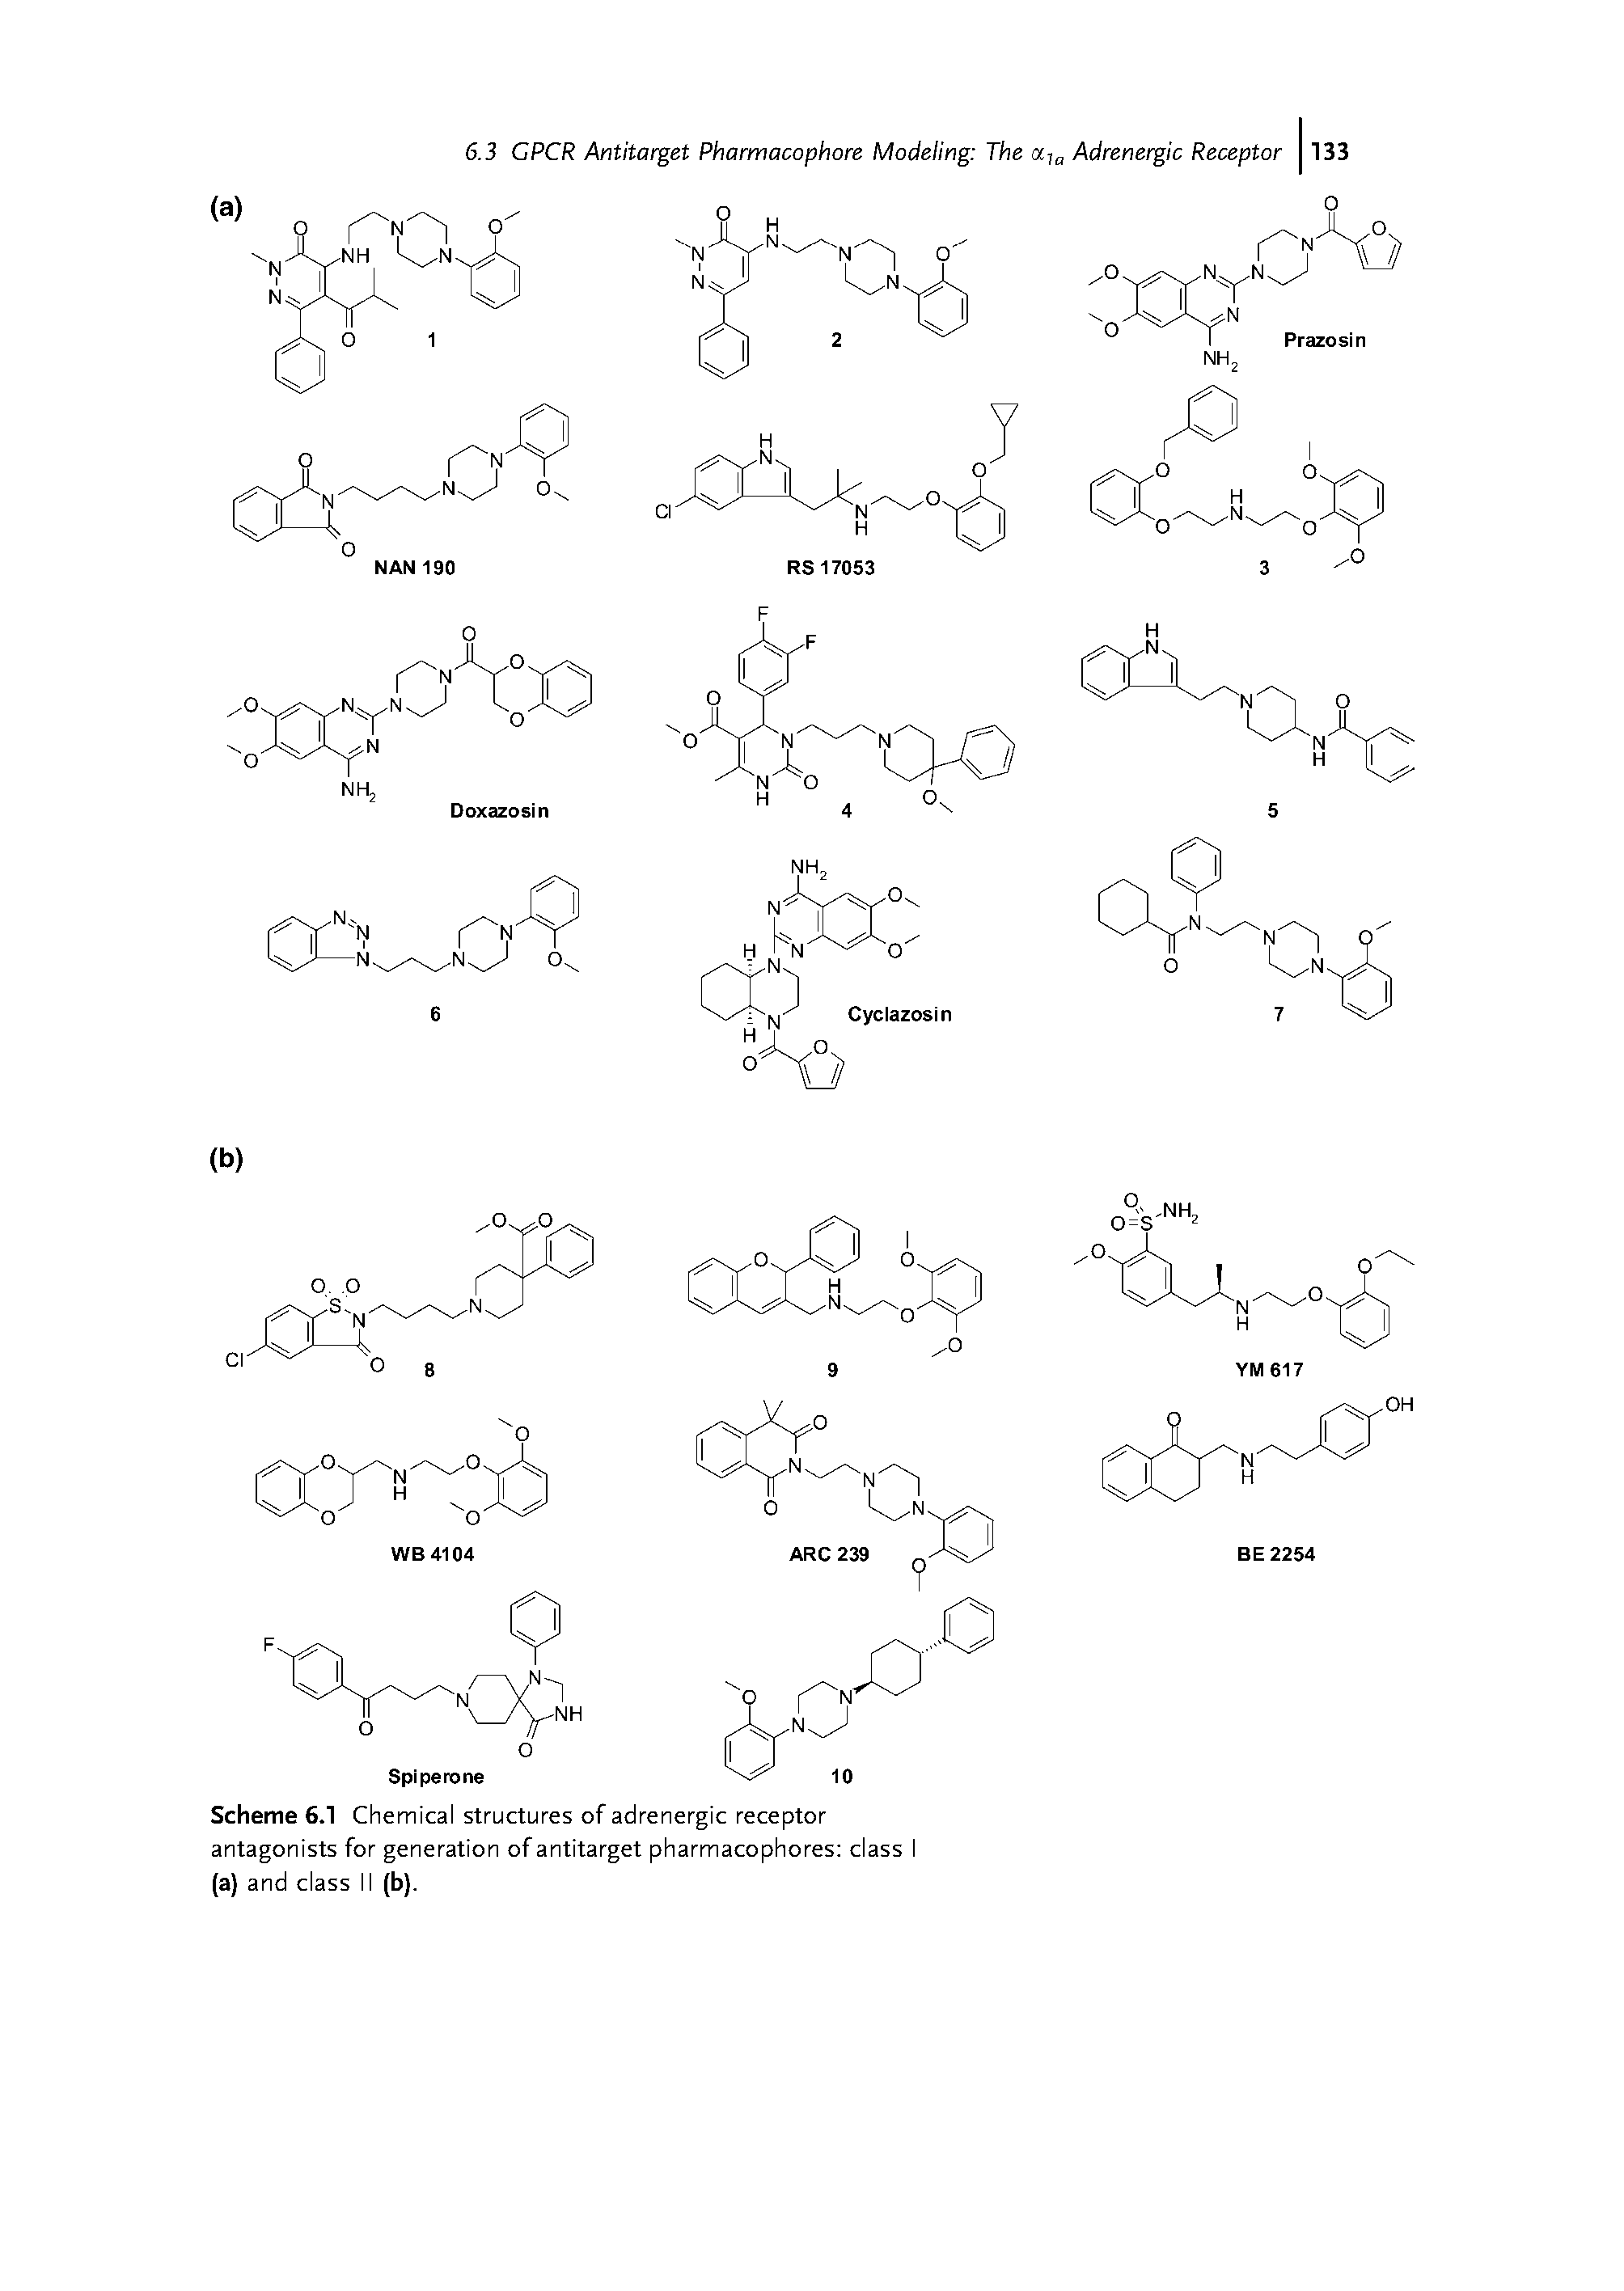 Scheme 6.1 Chemical structures of adrenergic receptor antagonists for generation of antitarget pharmacophores class I (a) and class II (b).